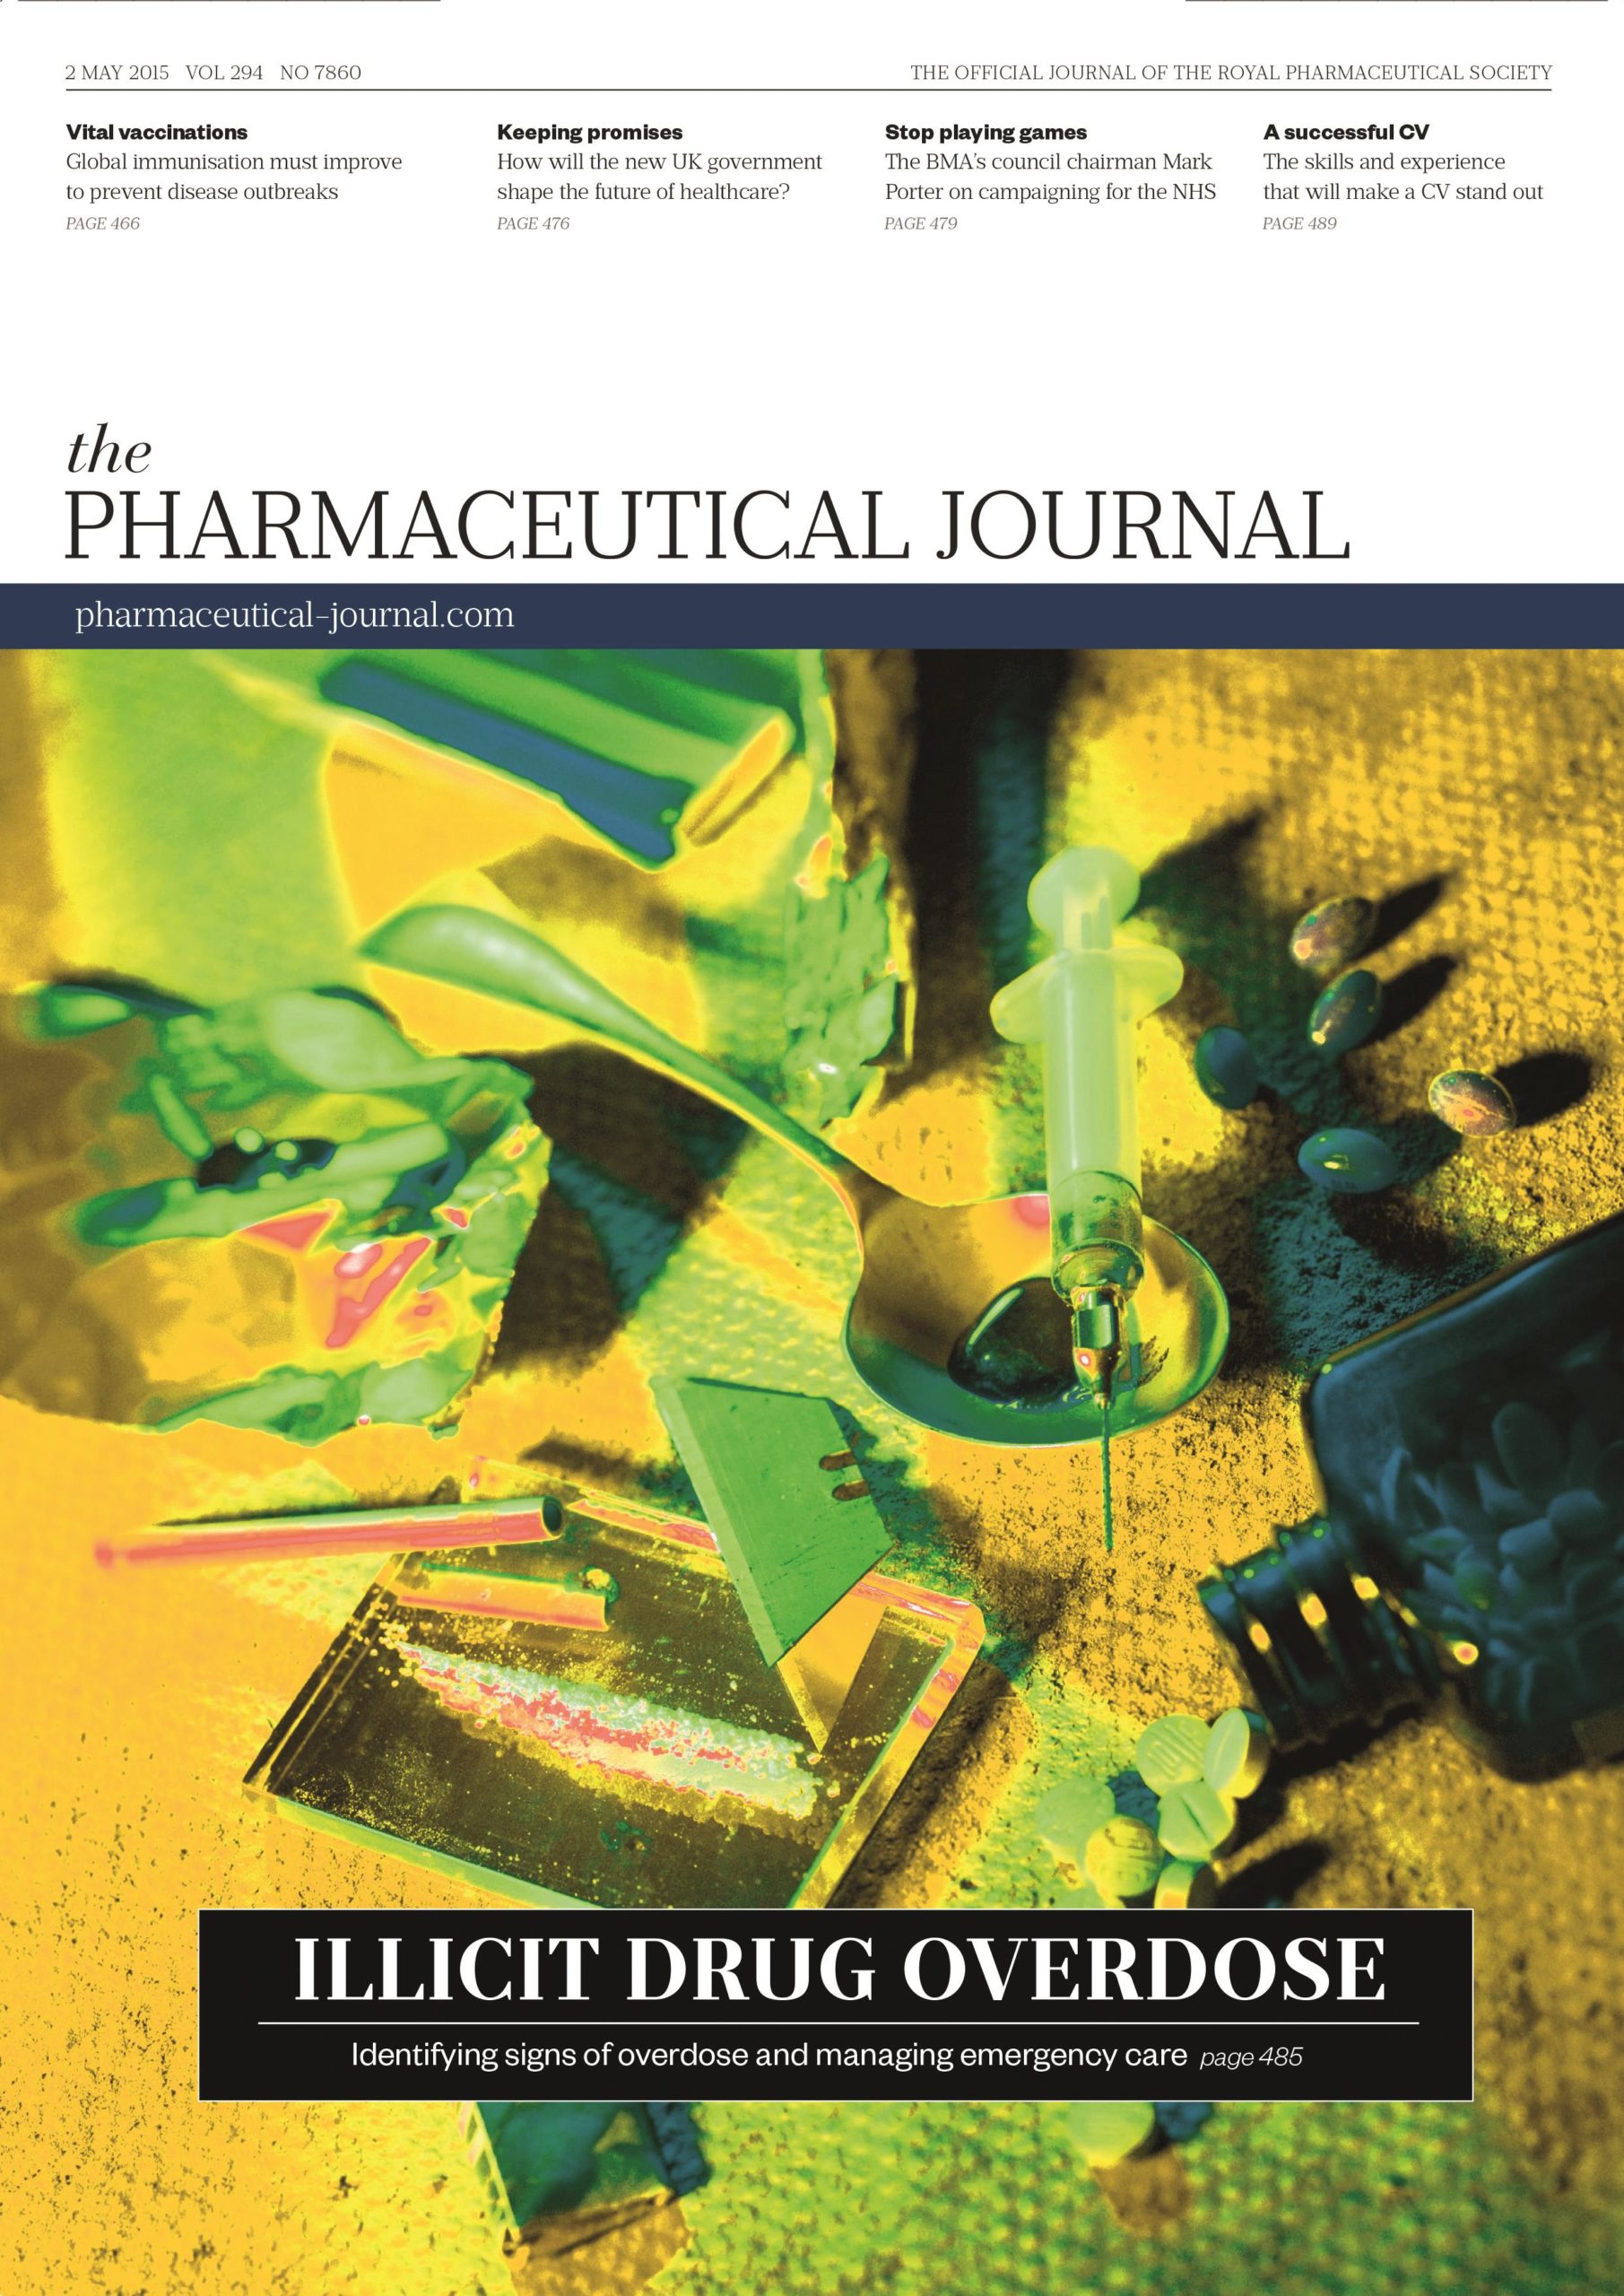 Publication issue cover for PJ, 2 May 2015, Vol 294, No 7860